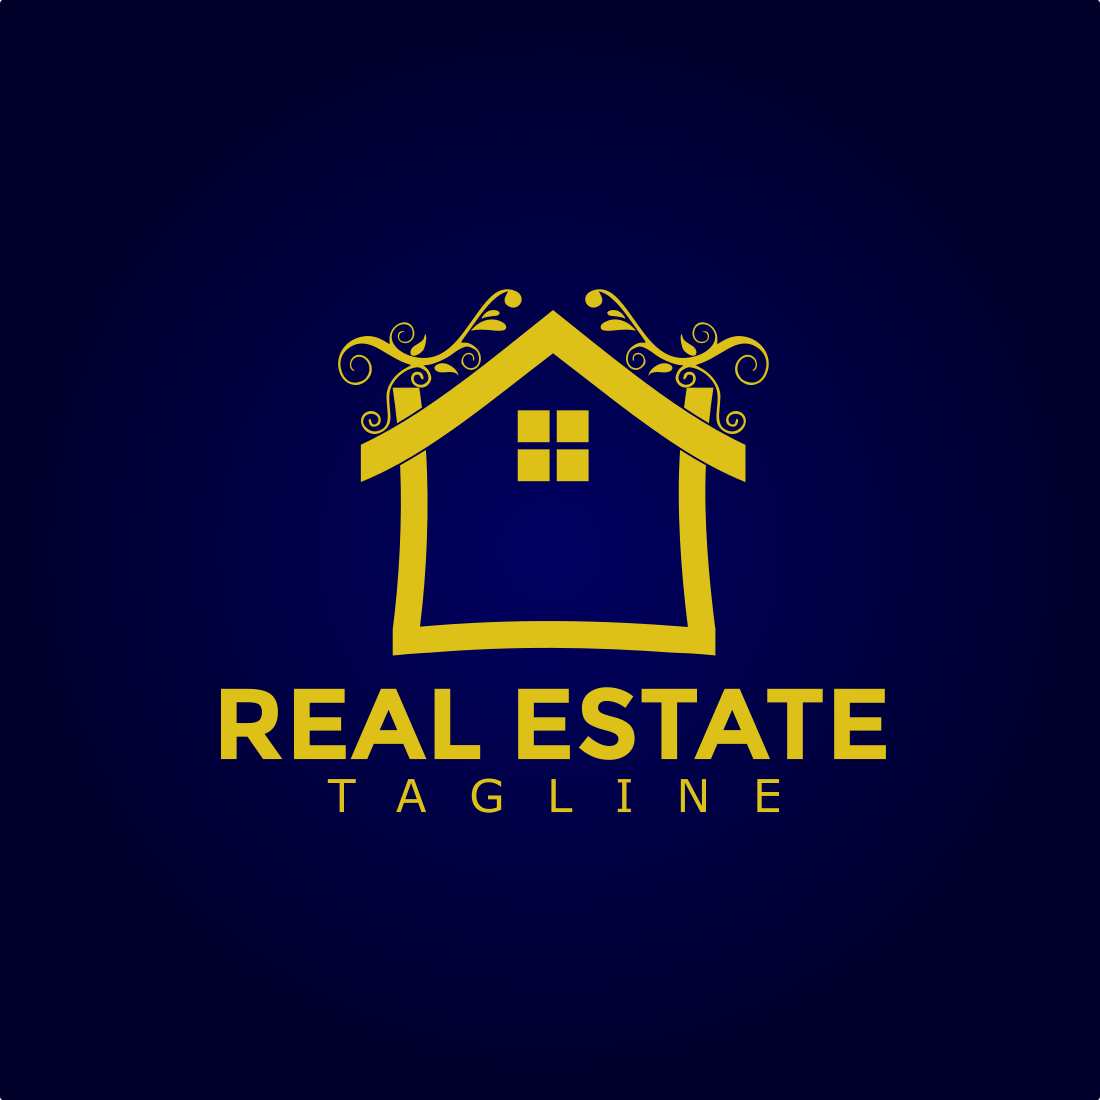 Awesome Real Estate Logo Design Template cover image.